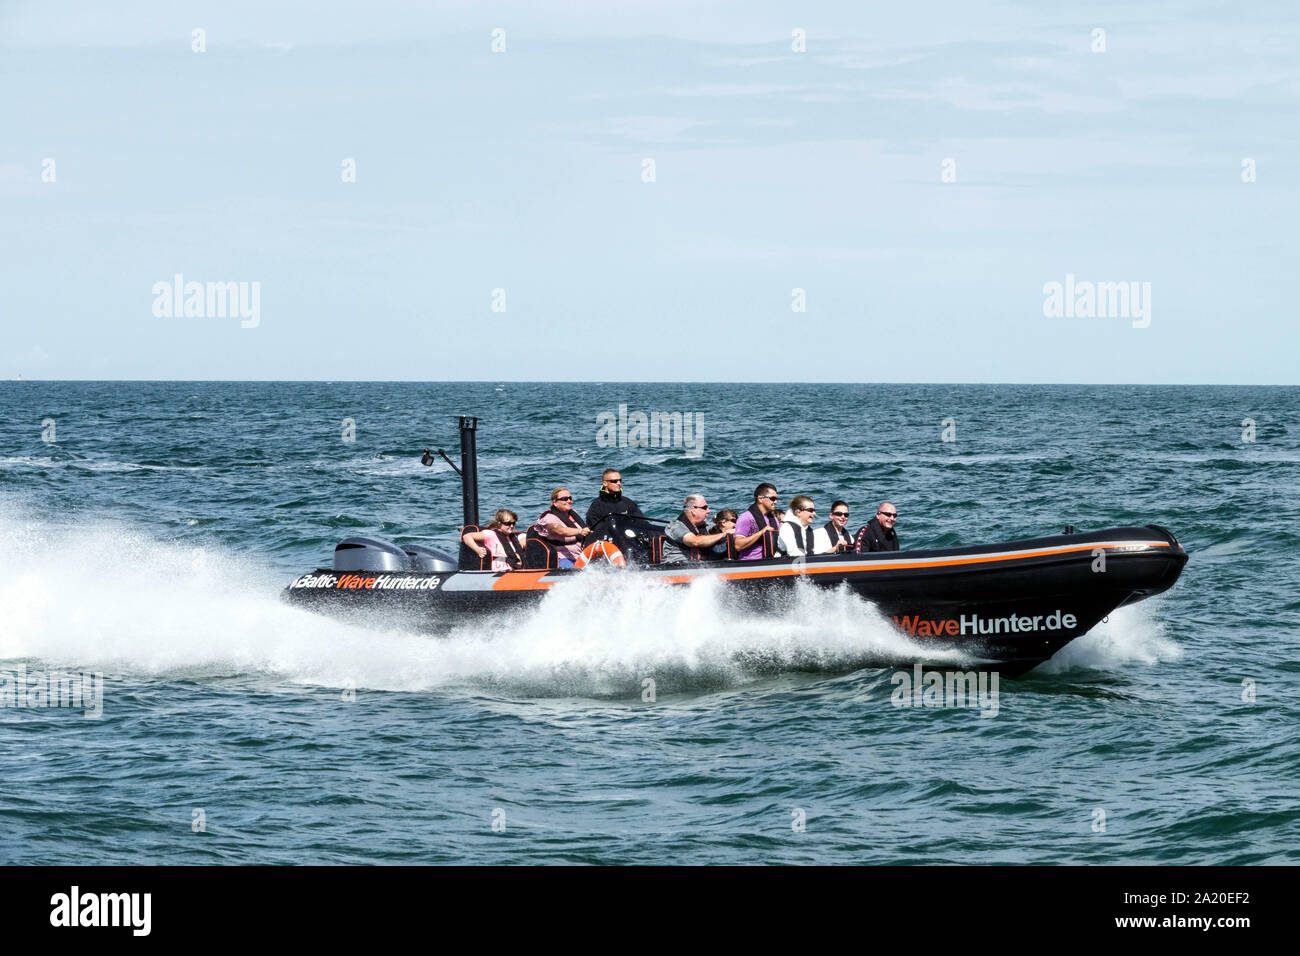 Tourists enjoying fast rides in an inflatable speedboat, Baltic Sea Rostock Germany tourists Europe enjoying travel experience, Powerboating Stock Photo